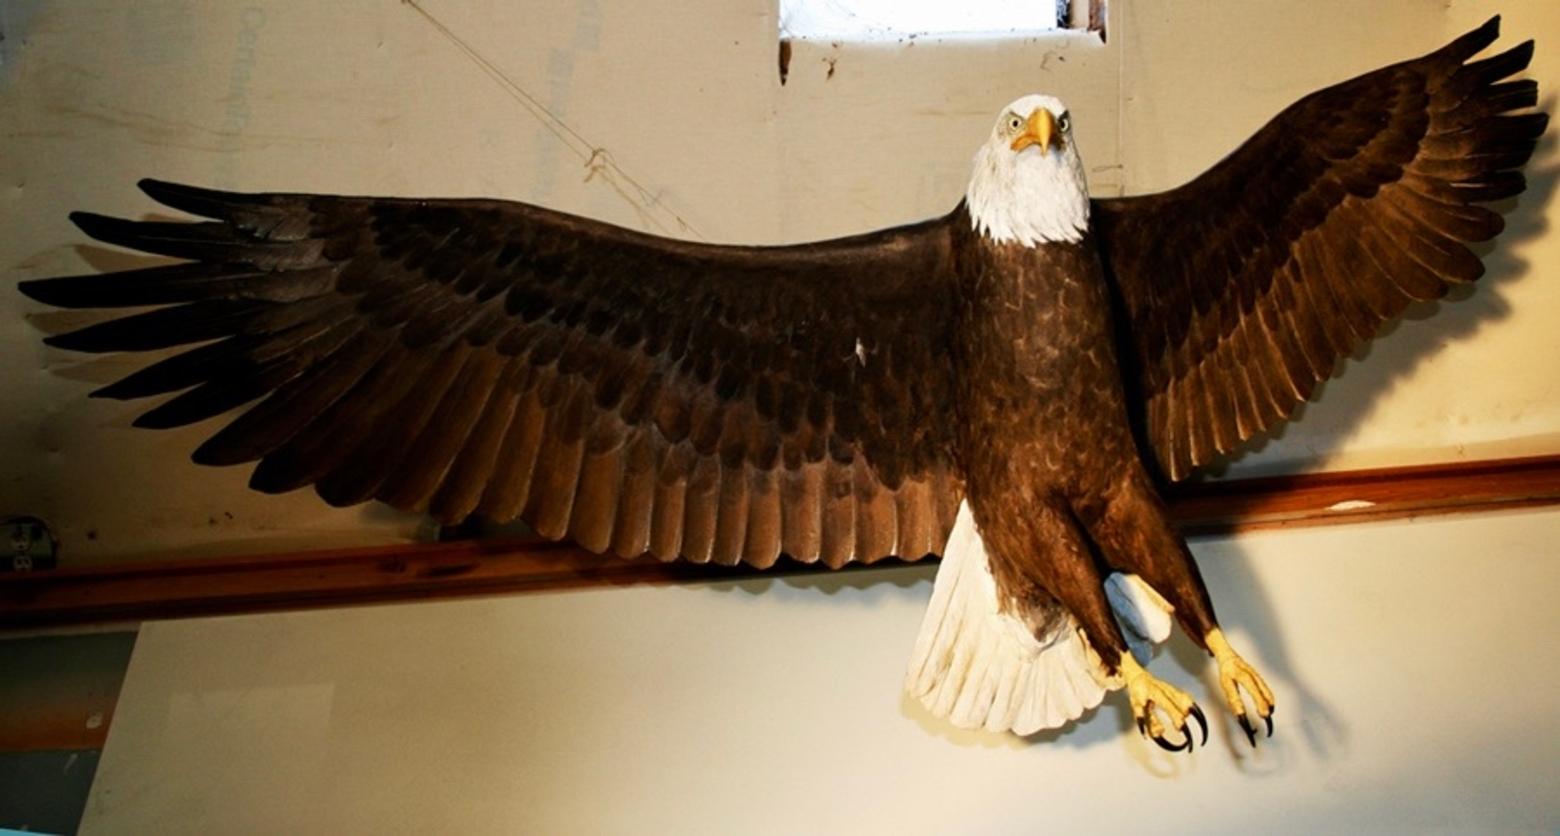 Top: As an icon, the bald eagle is featured as a subject of many decorative art items that citizens proudly display in their homes and offices. Just above: If eagles were hunted as trophies, and portrayed flying or perched on a tree snag, would that also be an expression of one's patriotic spirit? 